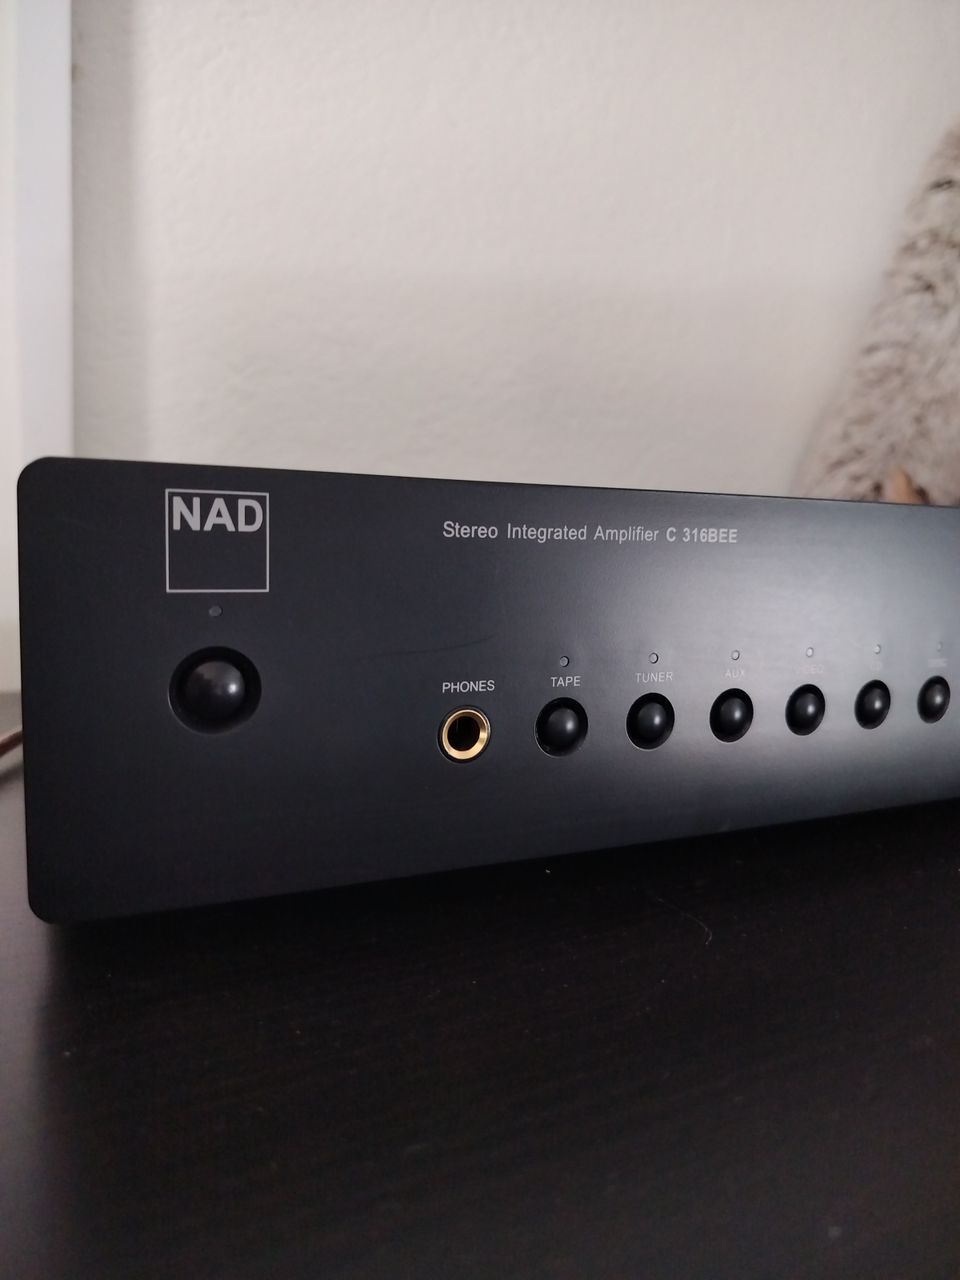 NAD Stereo Integrated Amplifier C 316BEE